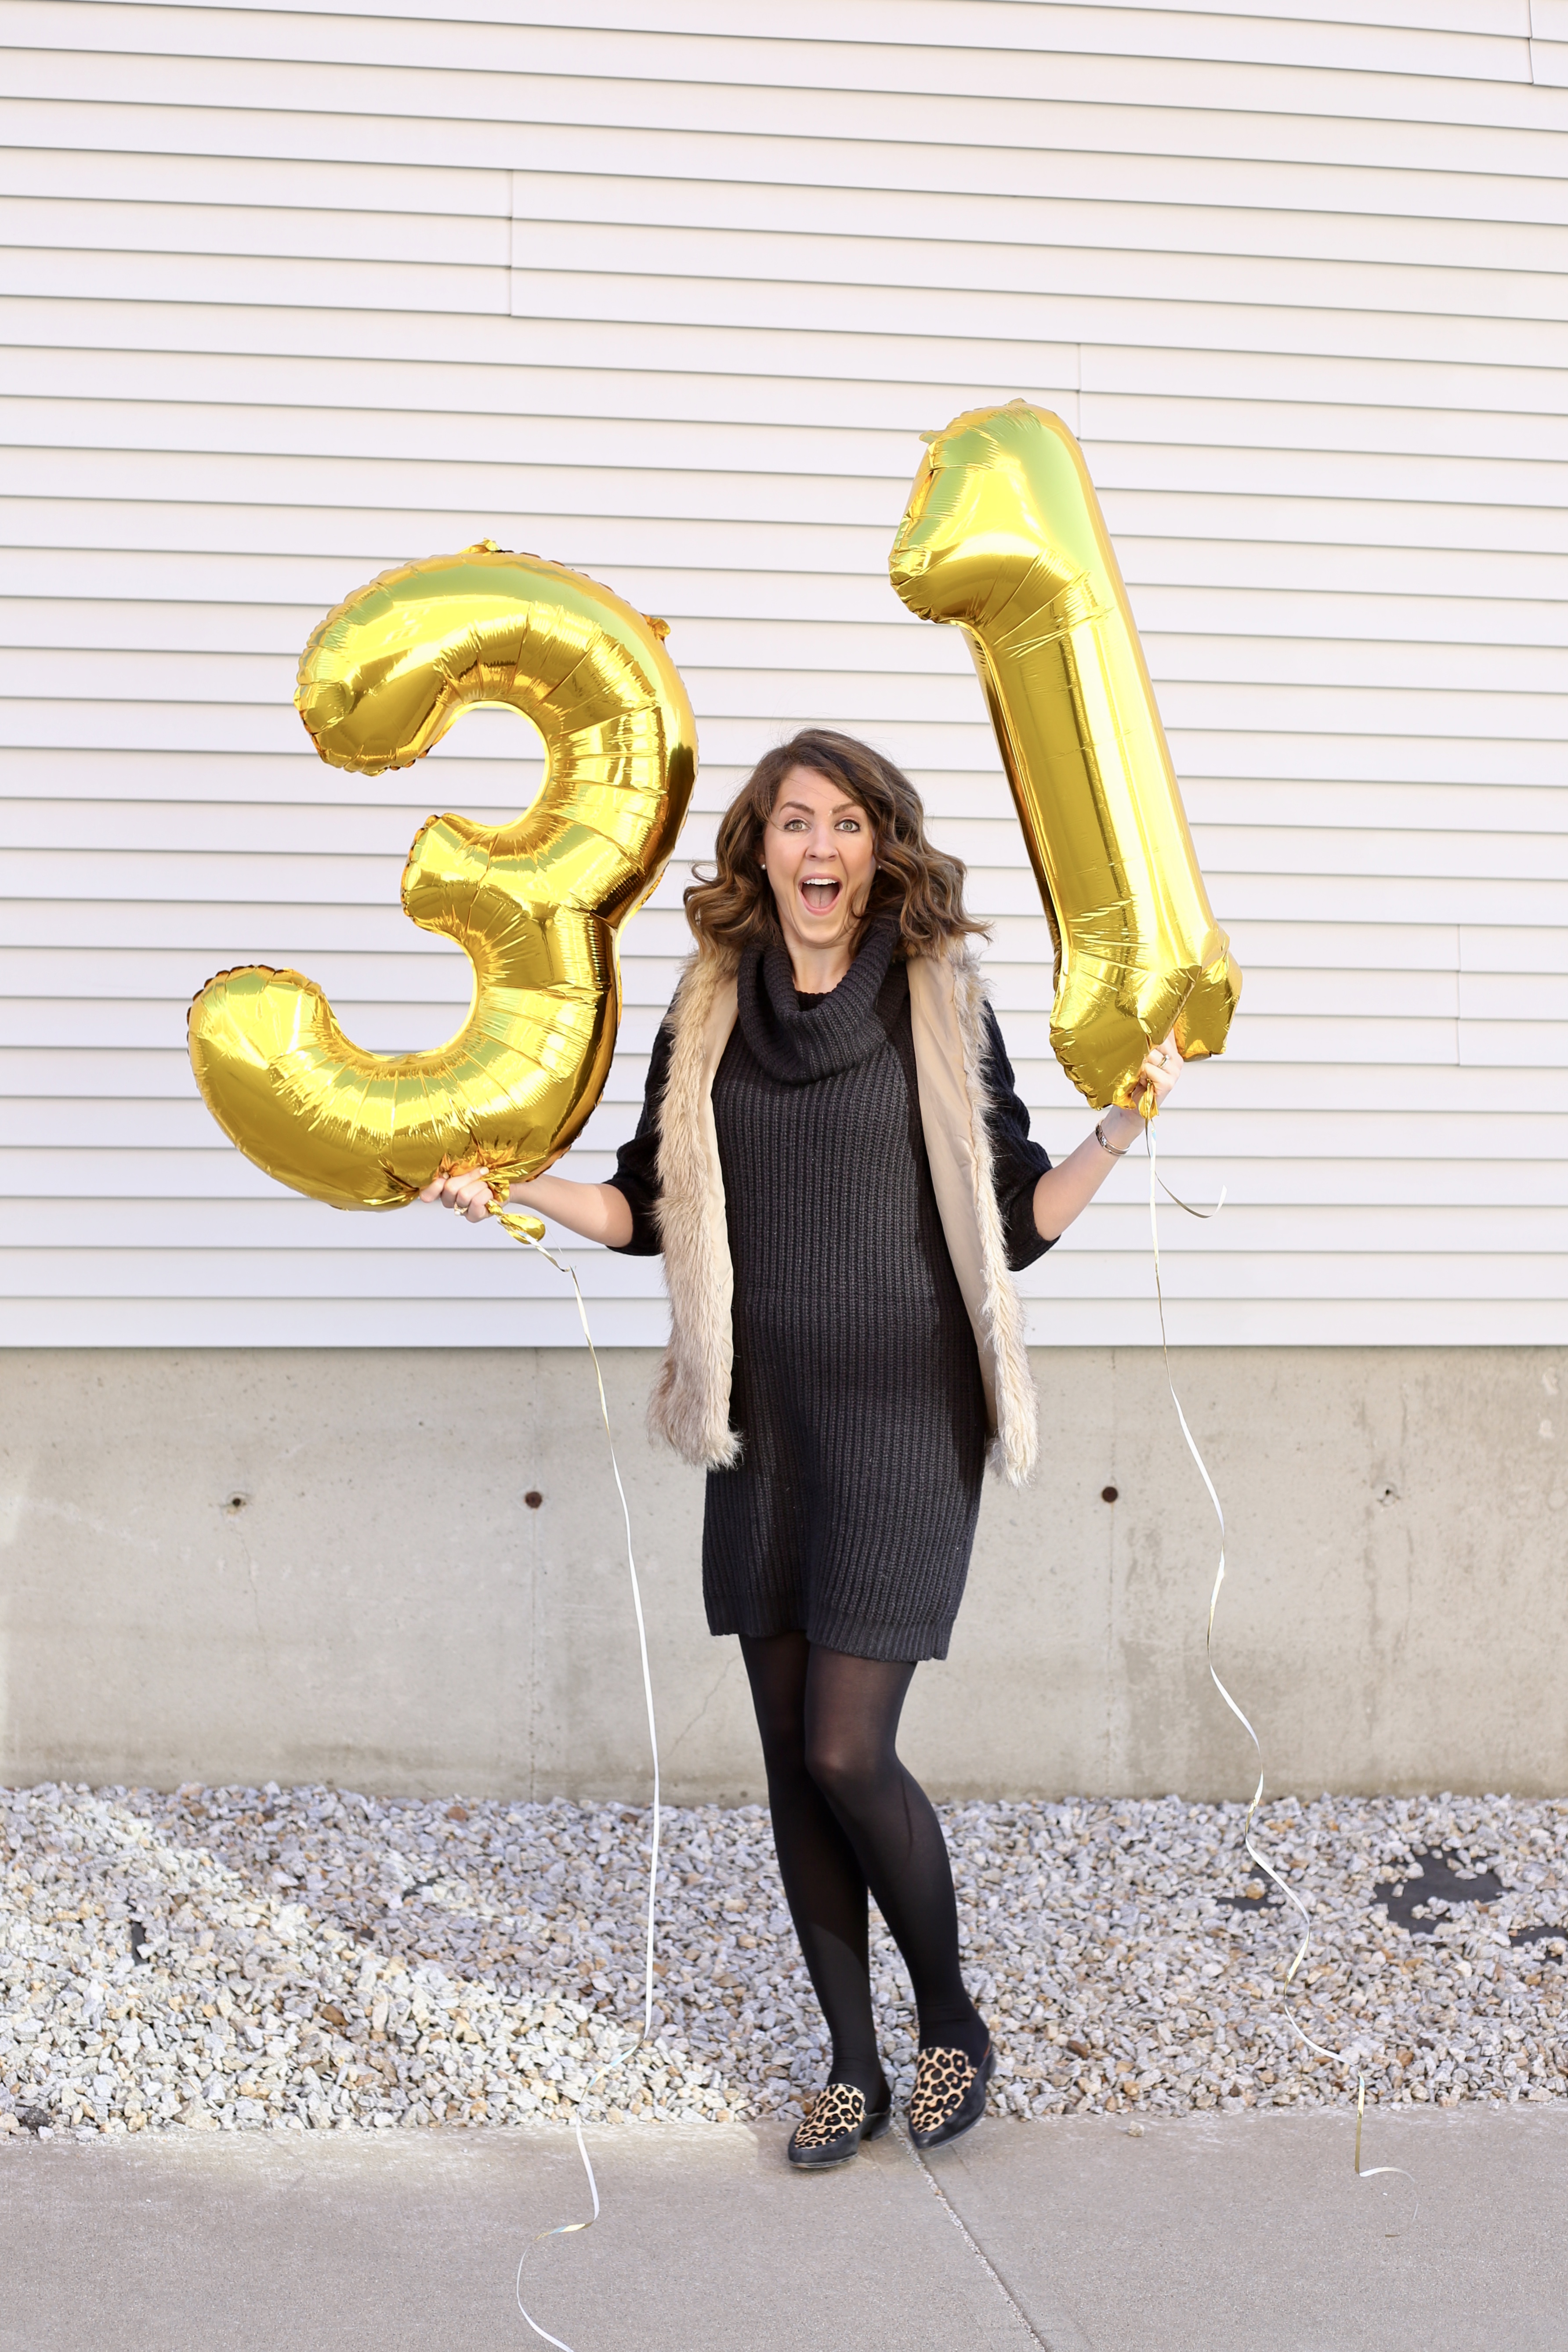 Happy Birthday to me! 31 things in 31 years + Nordstrom $500 giveaway